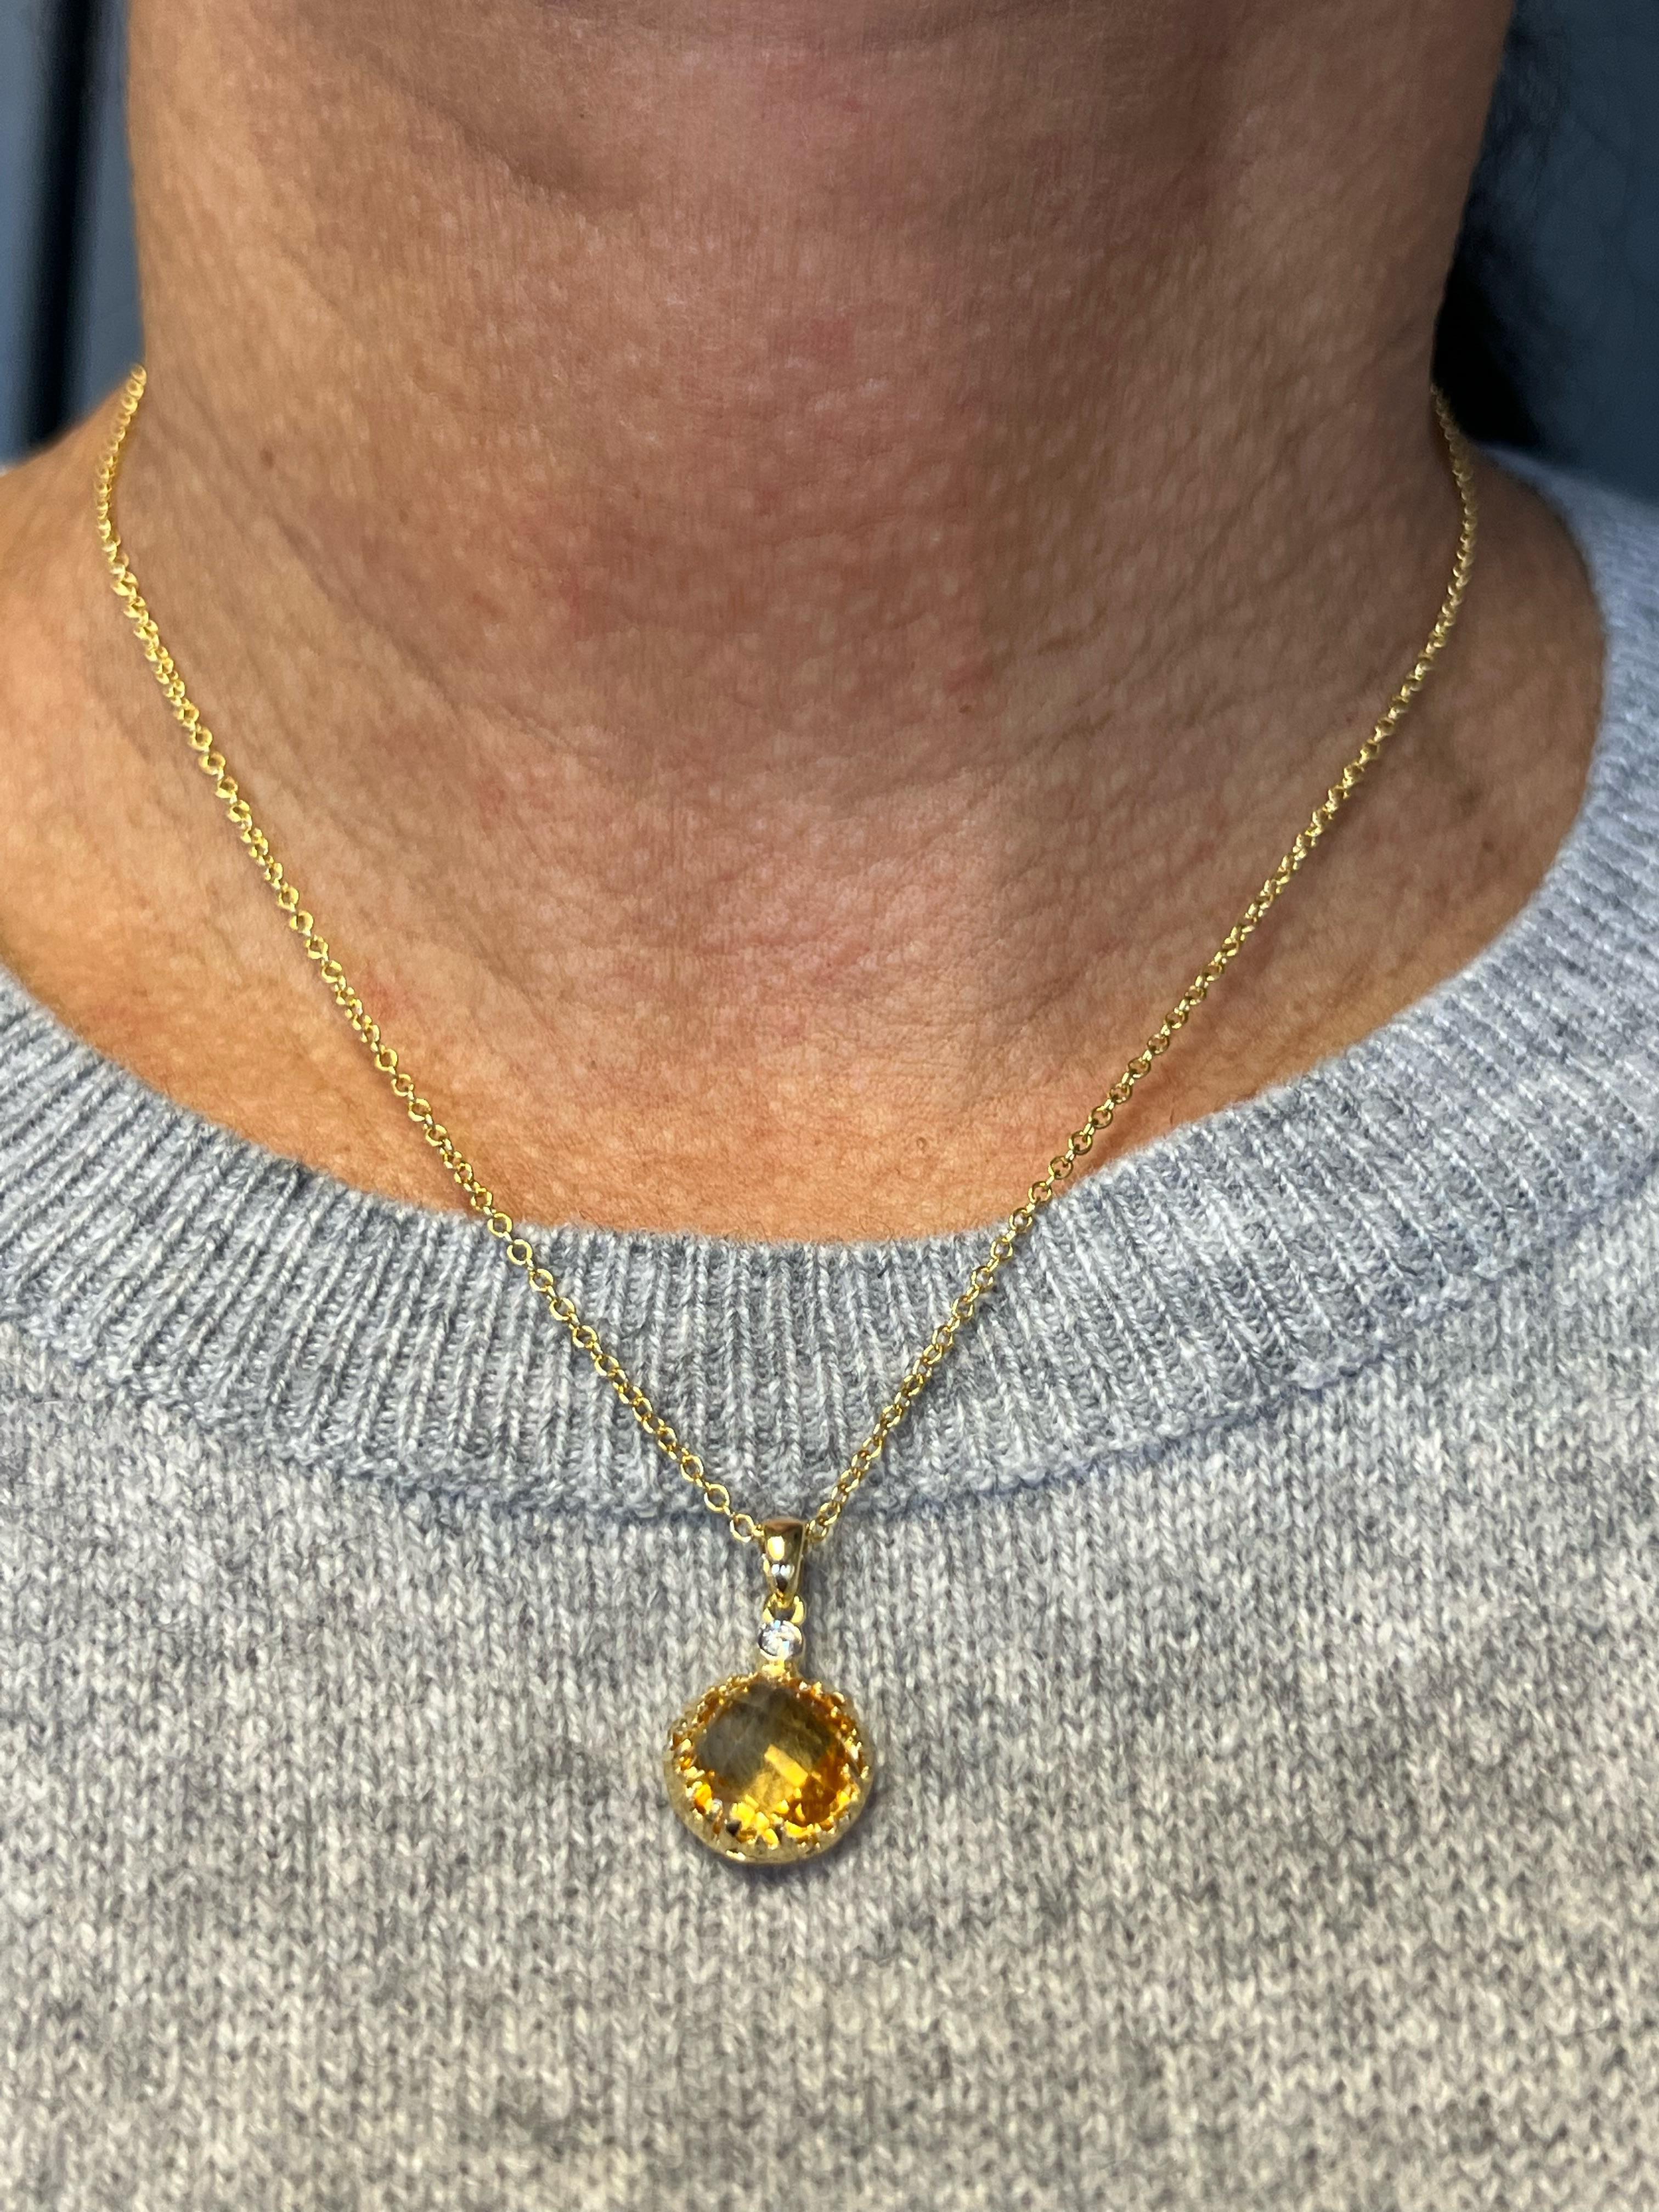 Women's Handcrafted 14k Yellow Gold 3.35 Carat Citrine Color Stone Pendant For Sale